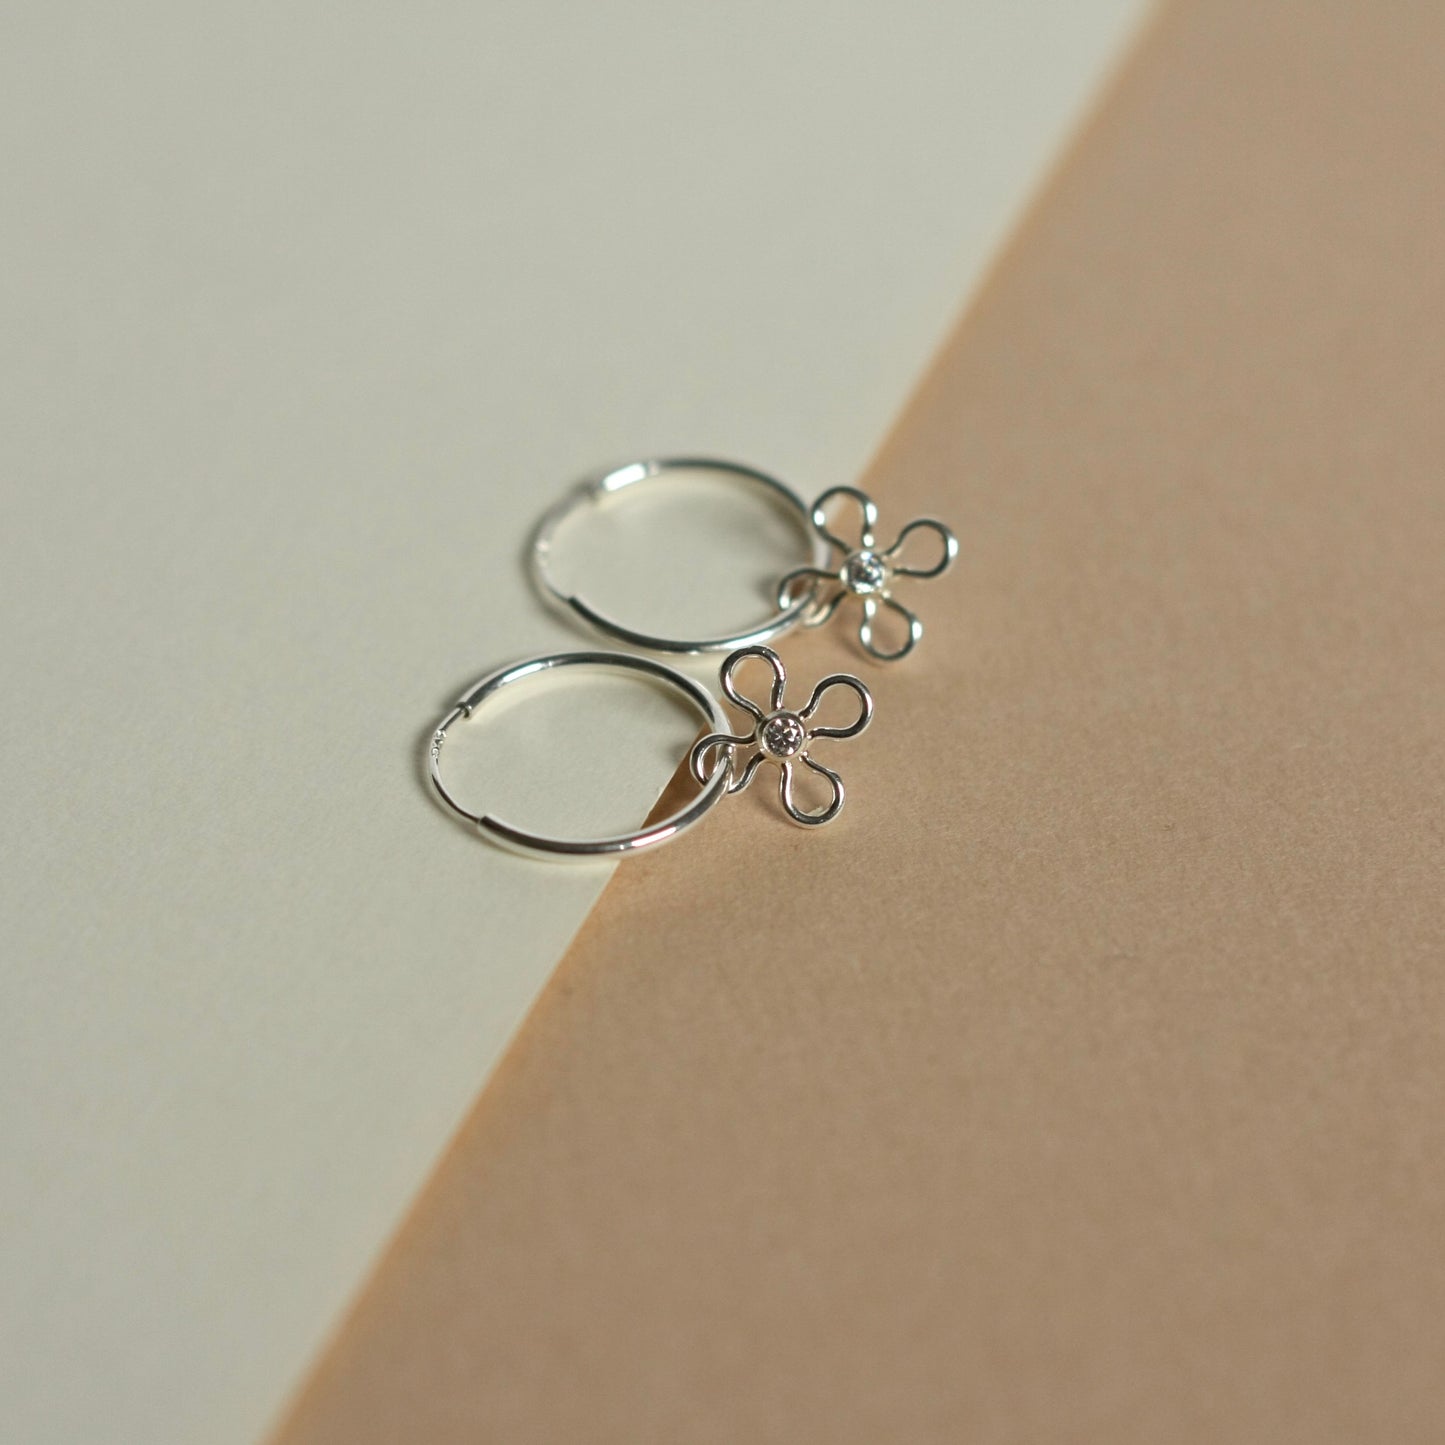 Small Silver Endless Hoops With Detachable Flower